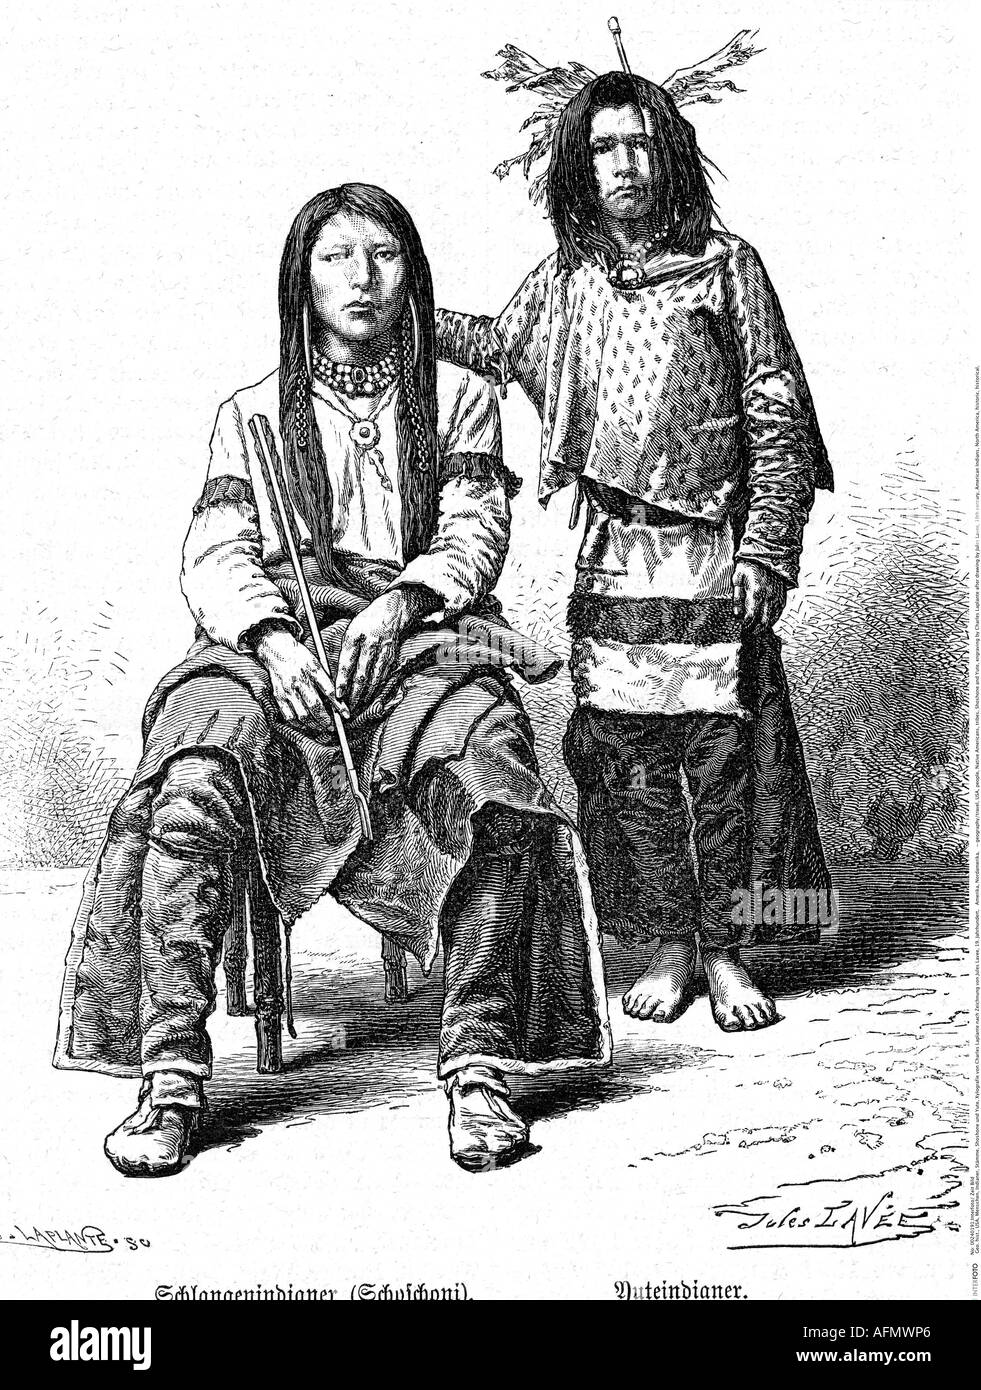 geography/travel, USA, people, Native Americans, tribes, Shoshone and Yute, engraving by Charles Laplante after drawing by Jules Lavee, 19th century, American Indians, North America, historic, historical, Stock Photo